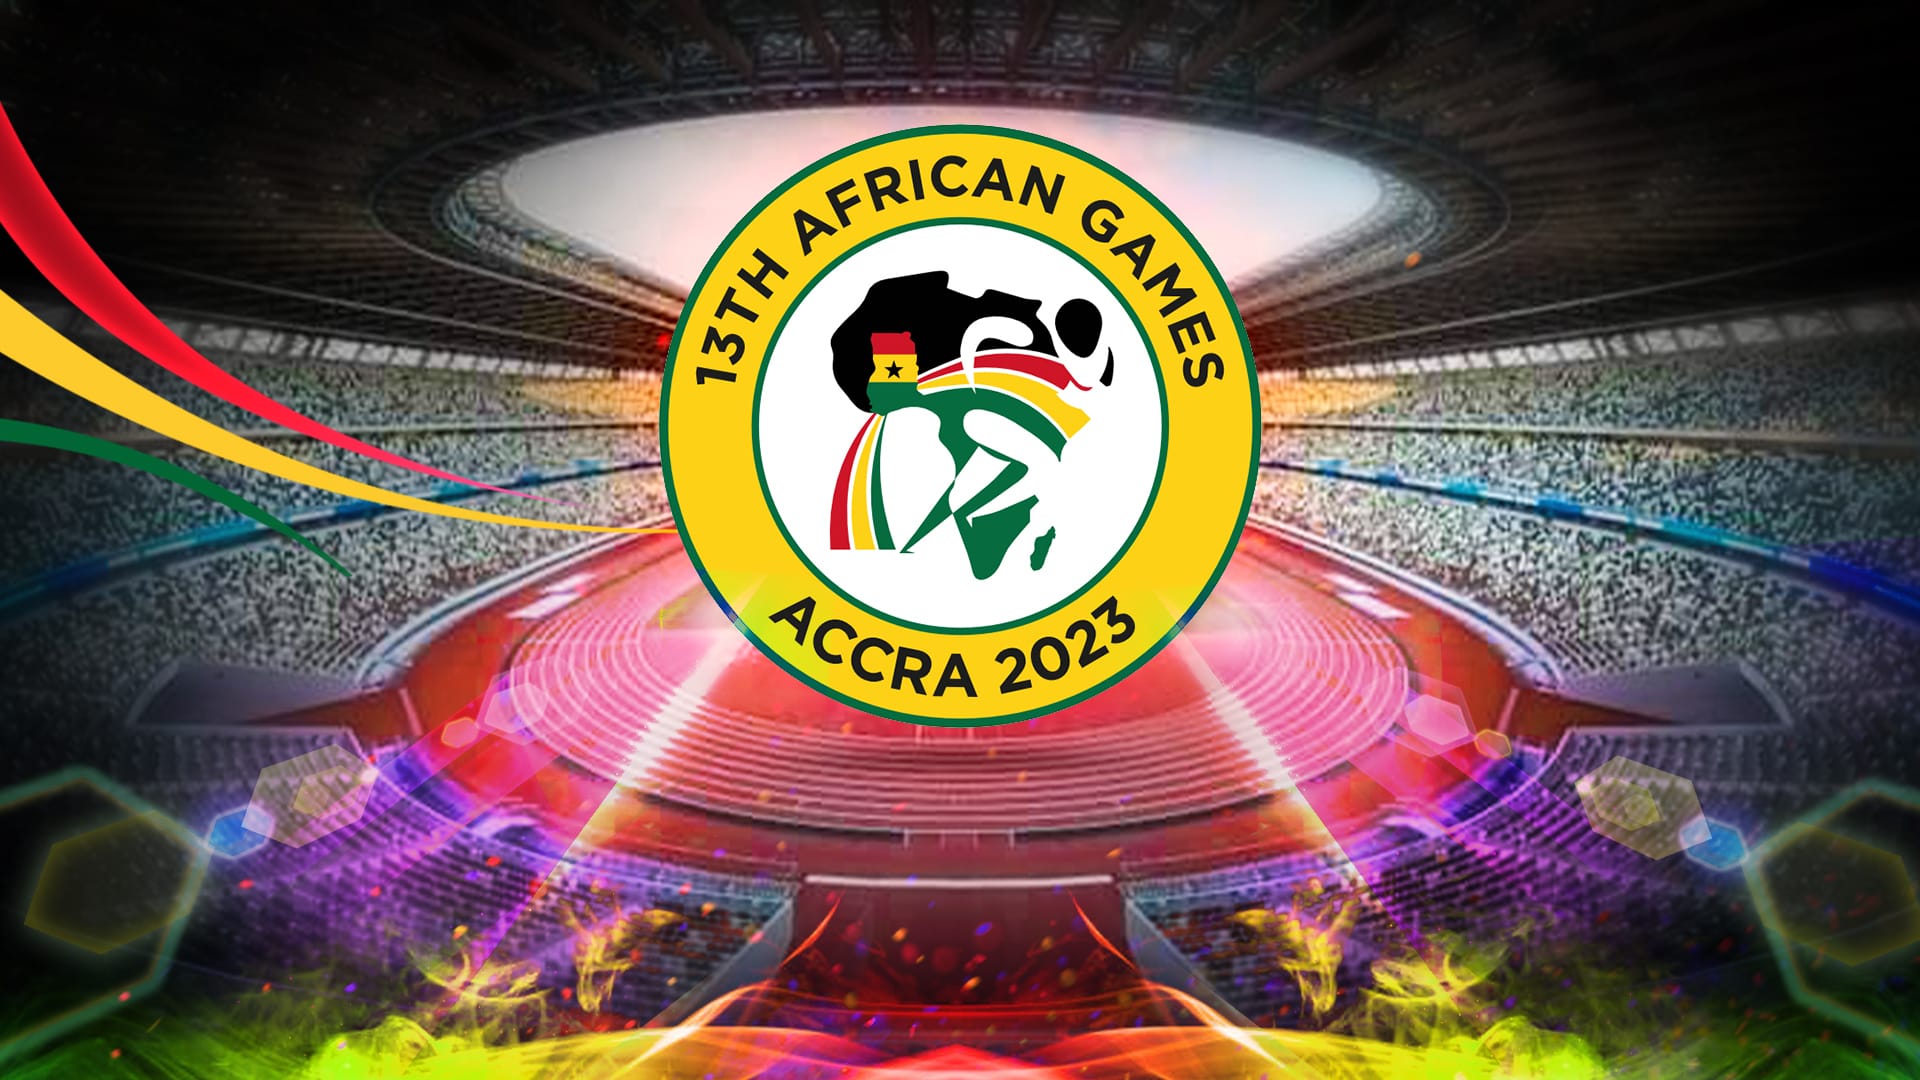 Accra 2023 African Games 11th March